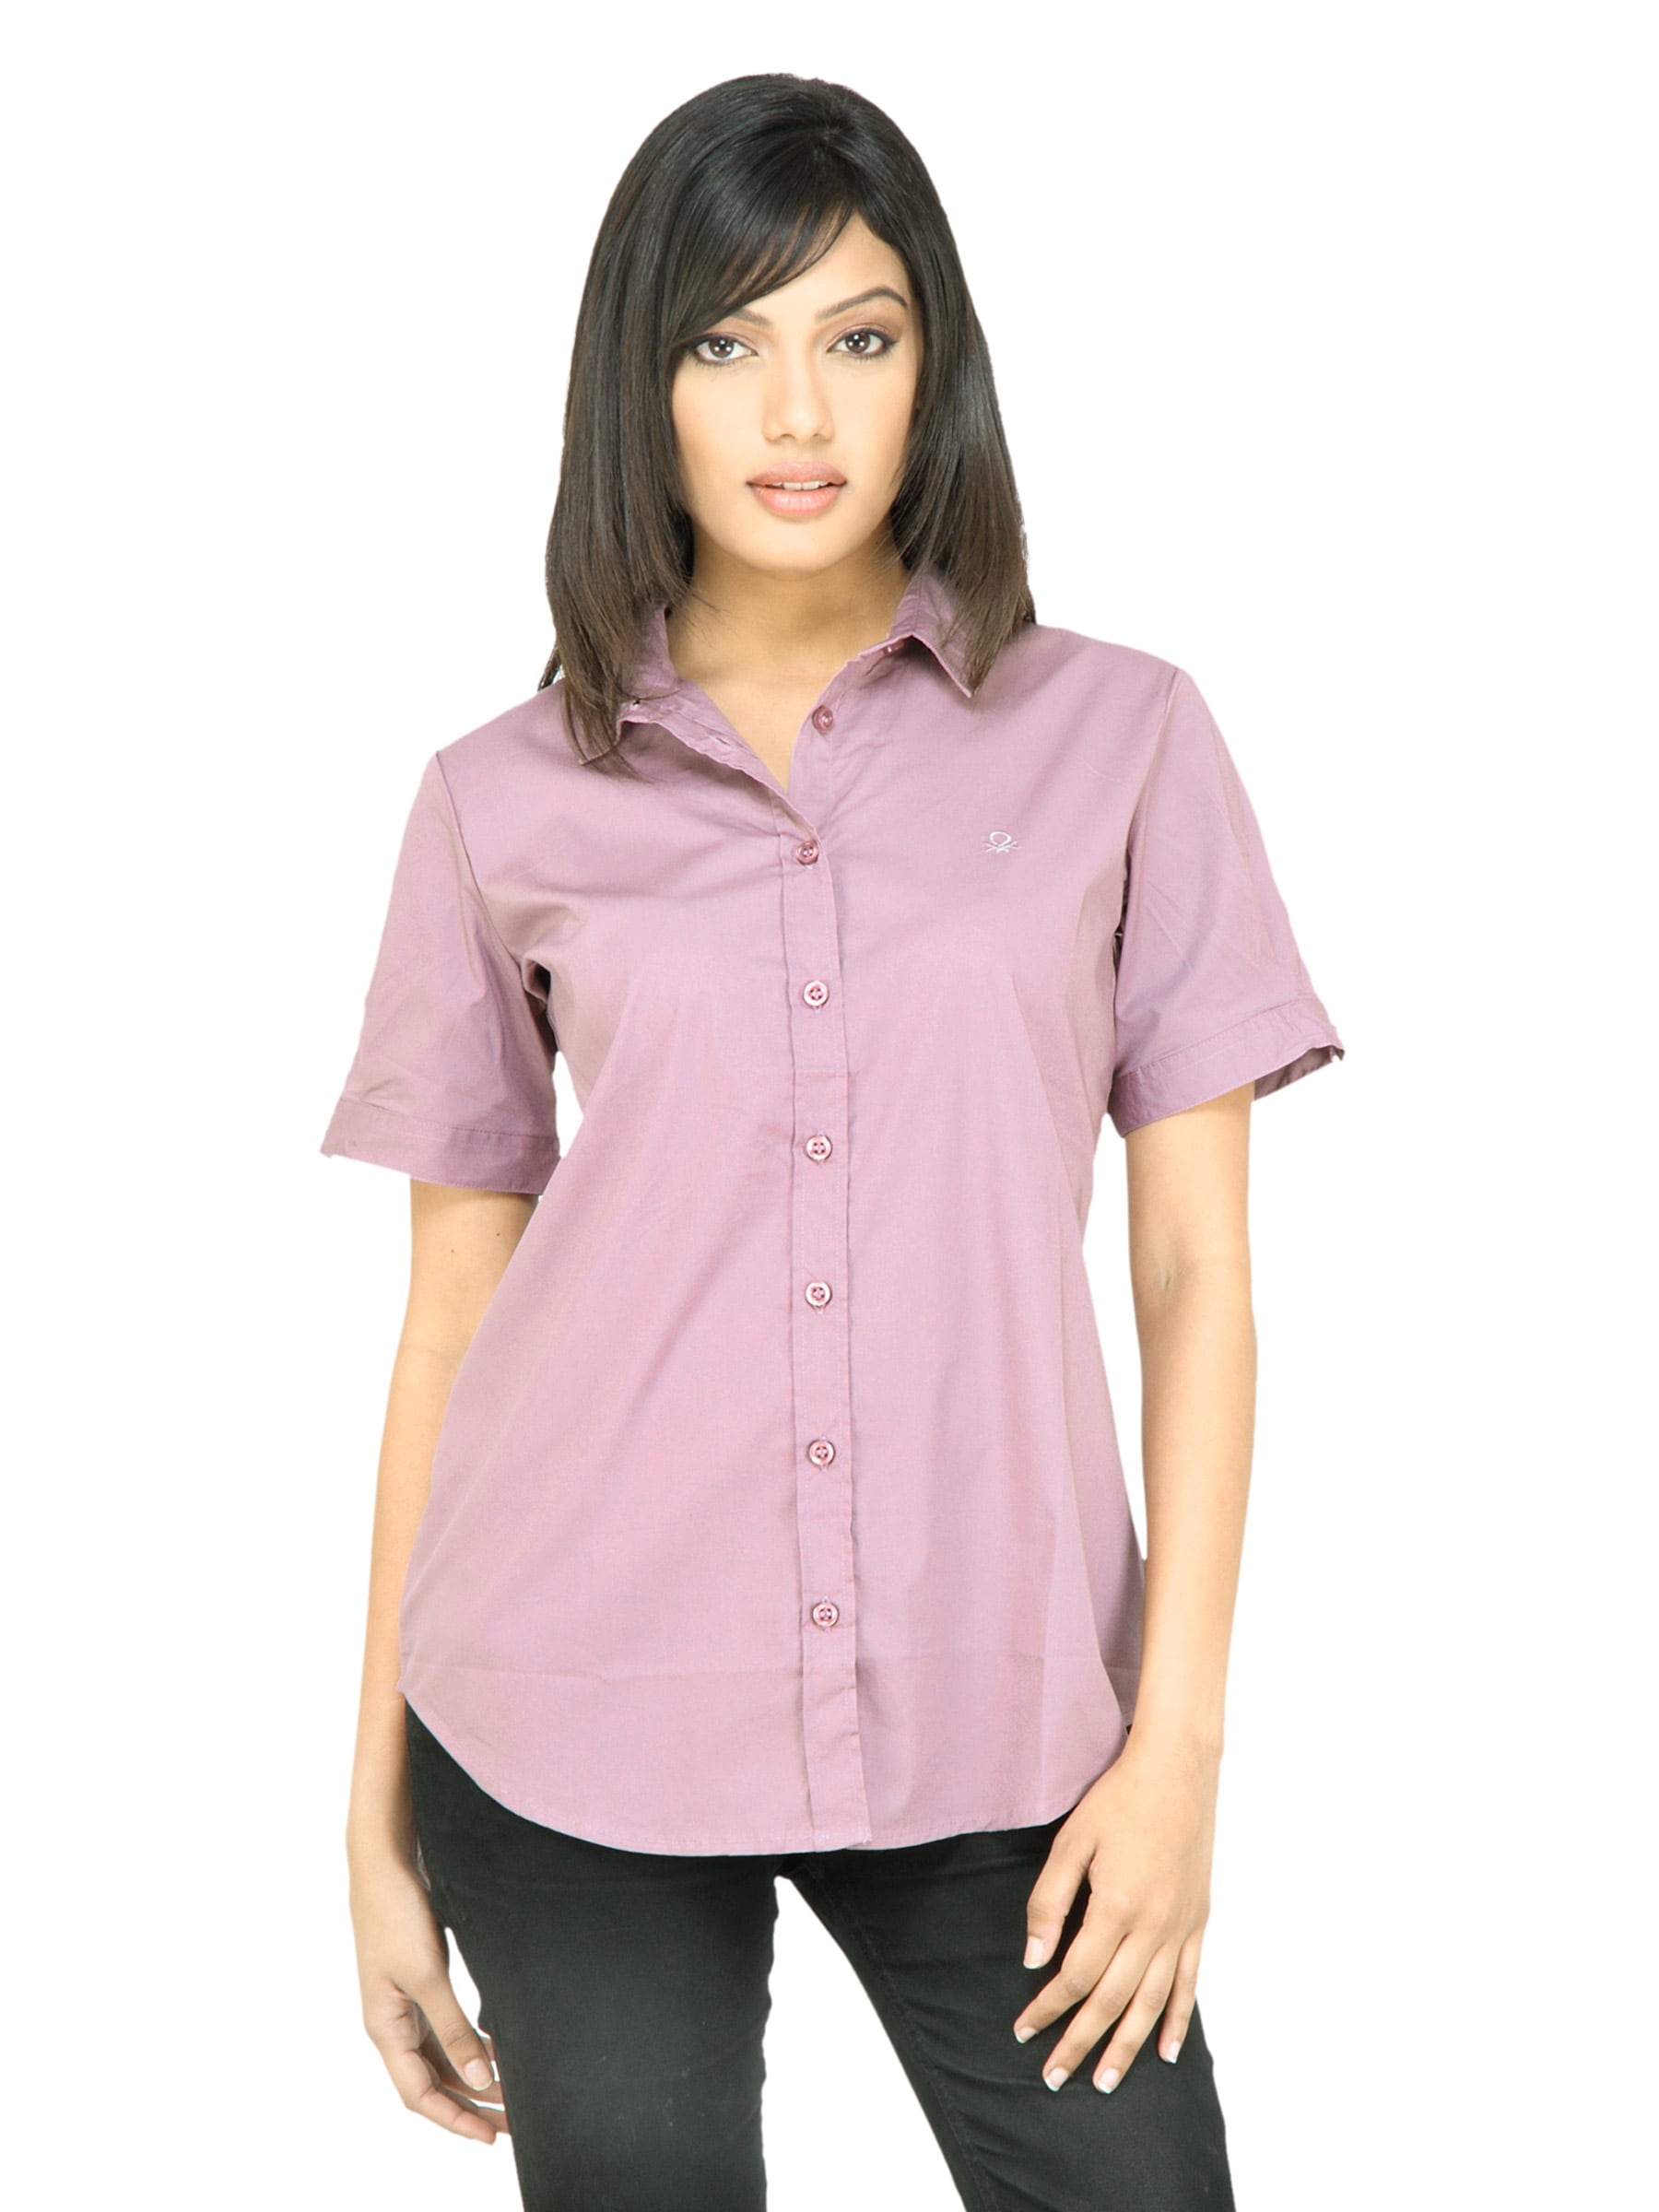 United Colors of Benetton Women Solid Lavender Shirt